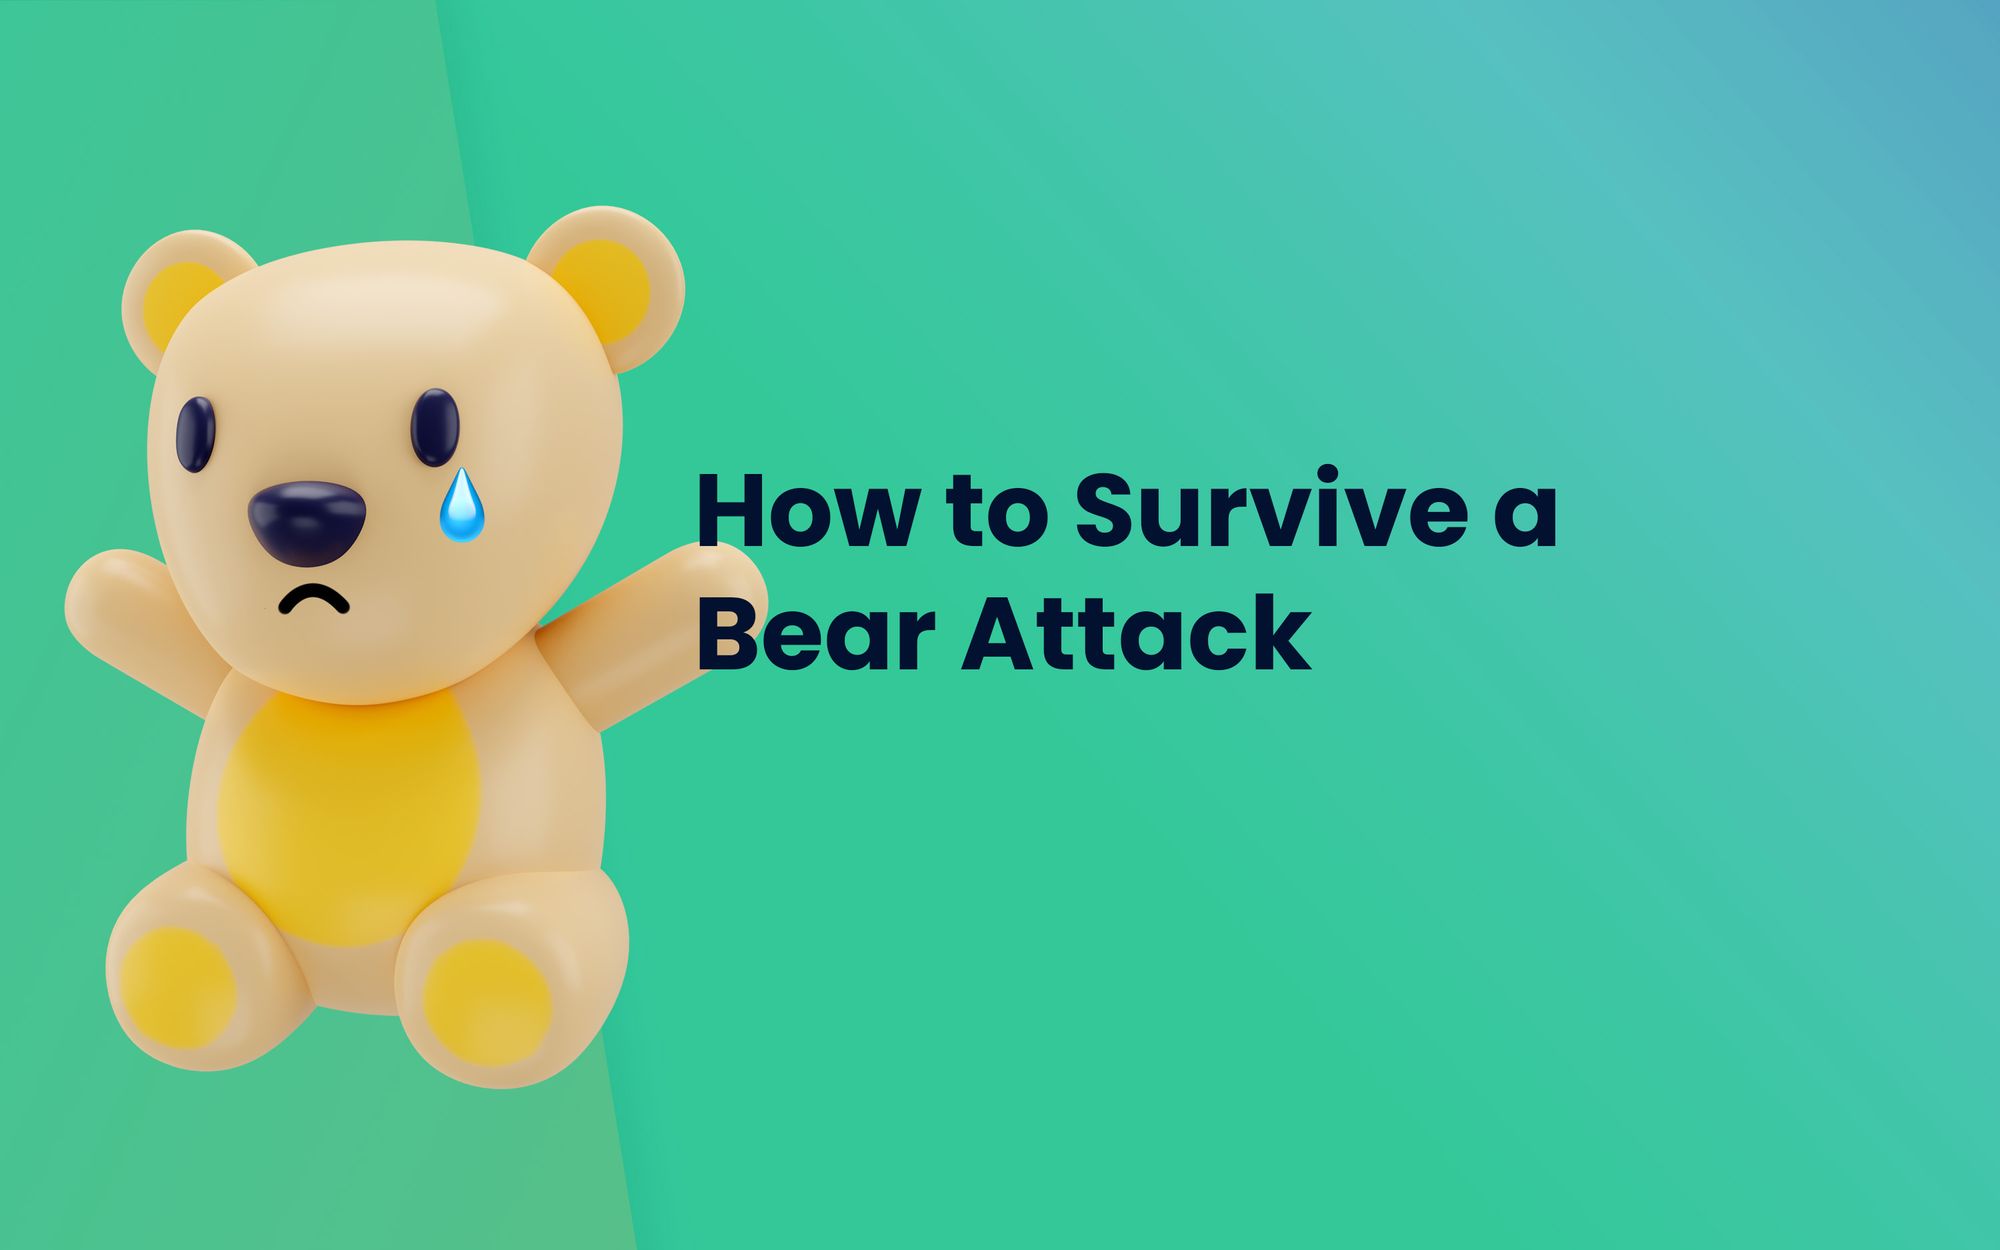 How to survive a bear attack?